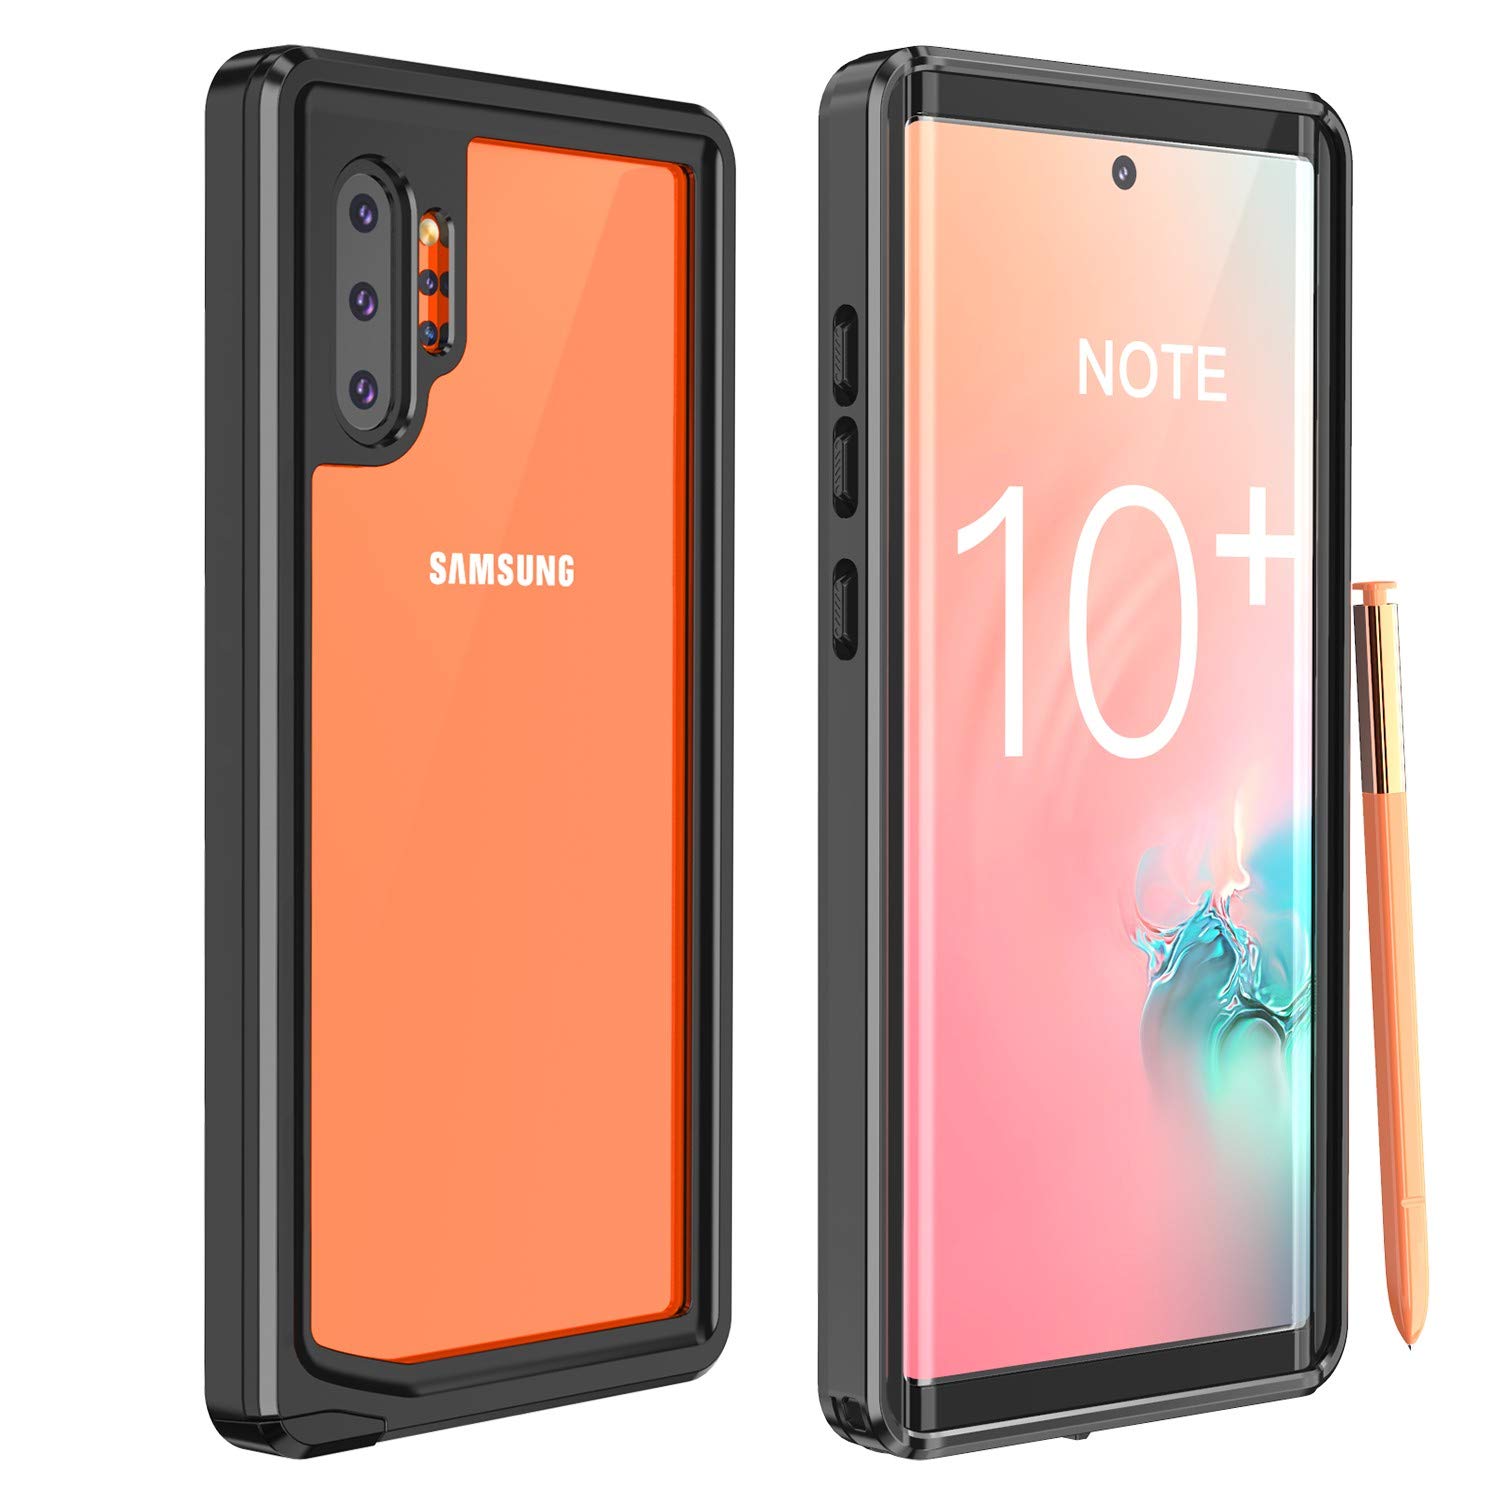 Rugged Cover Case for Samsung Galaxy Note 10+